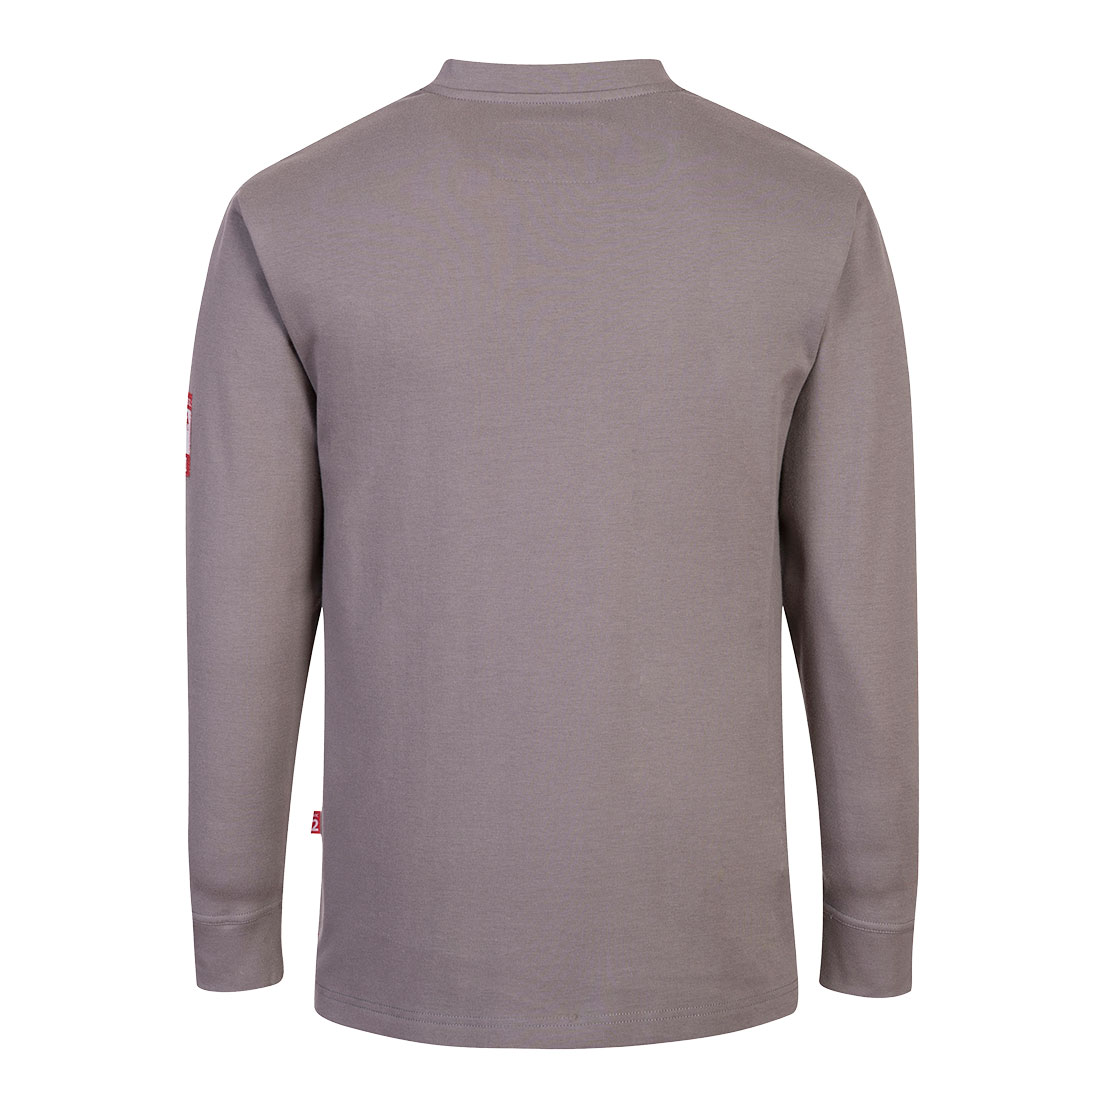 FR32 Portwest® Bizflame® Knit Flame-Resistant Anti-Static Henley Shirt - gray